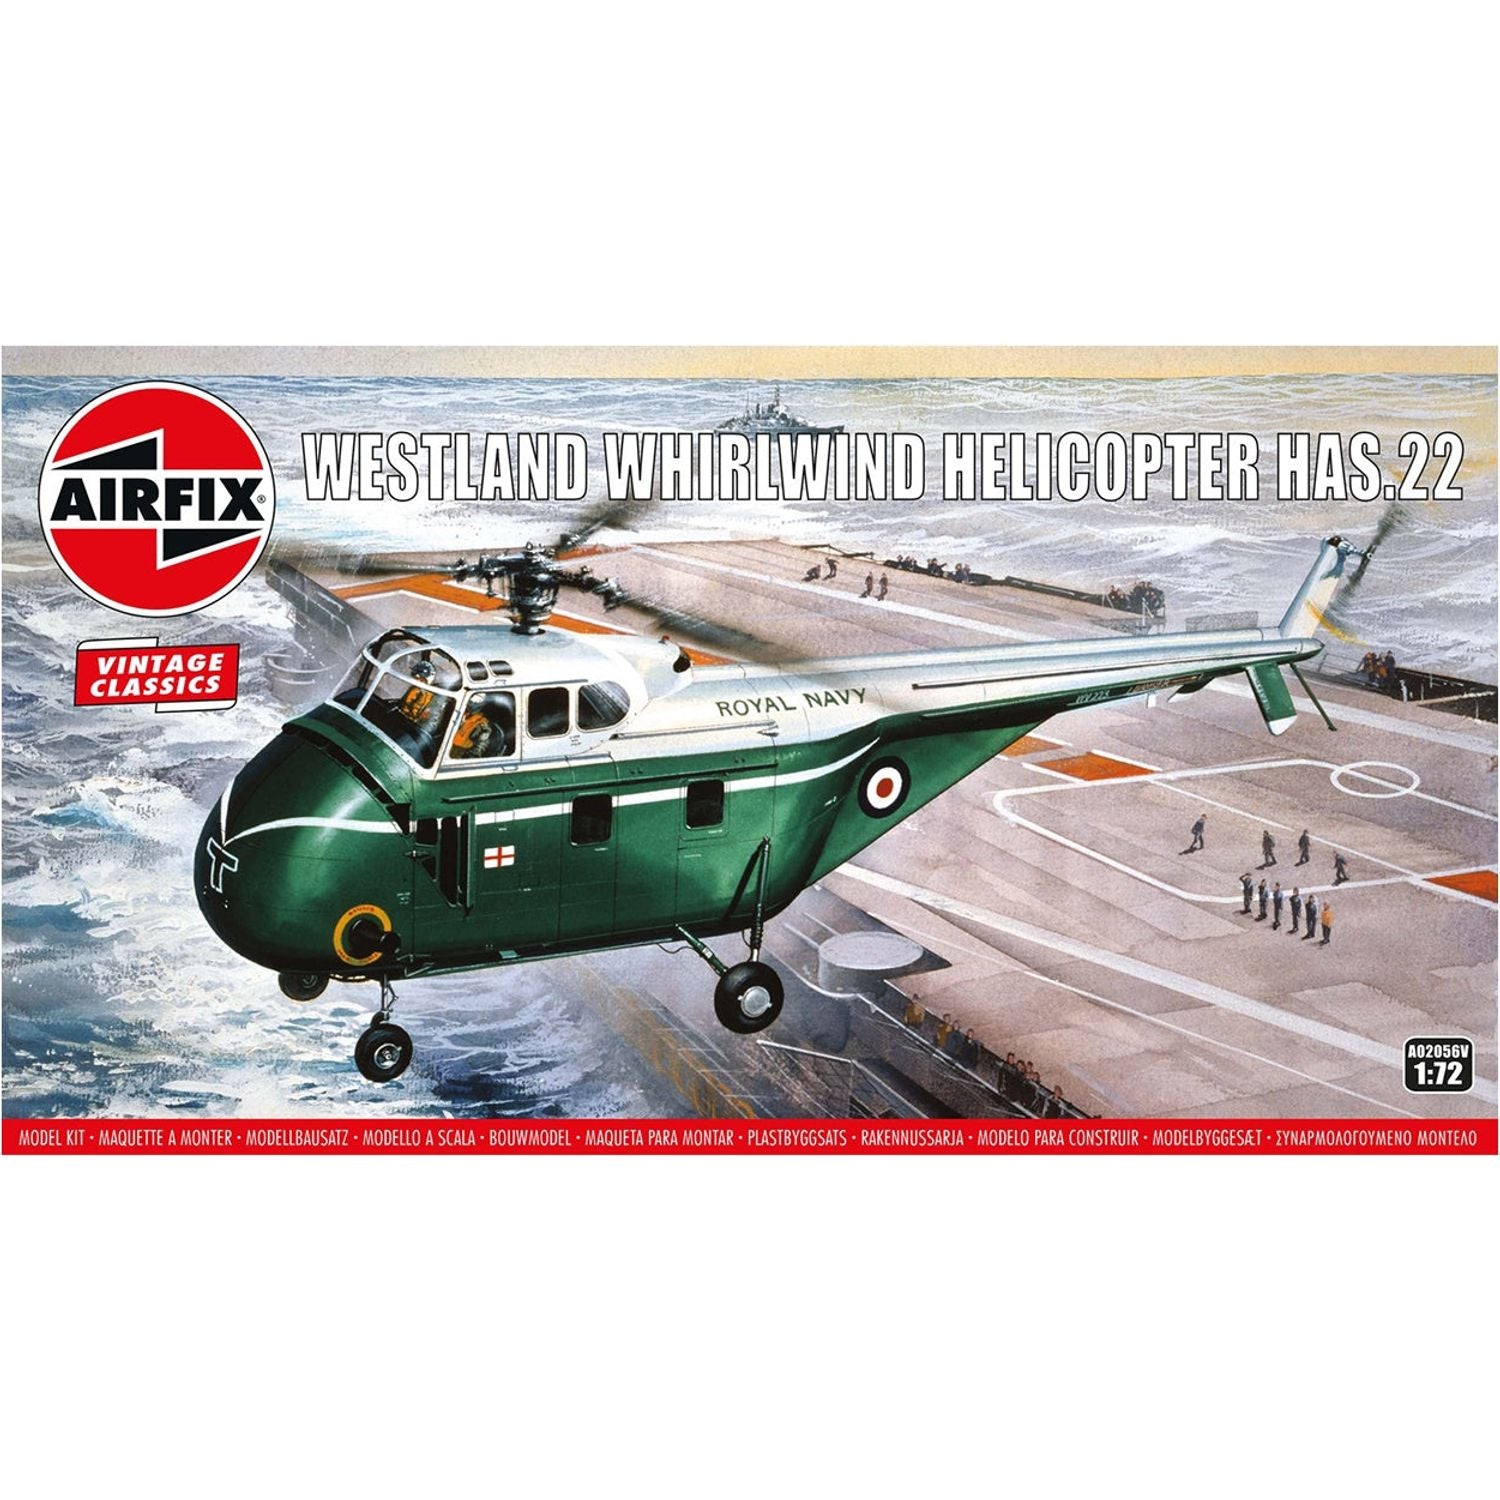 Westland Whirlwind Helicopter 1/72 #02056 by Airfix